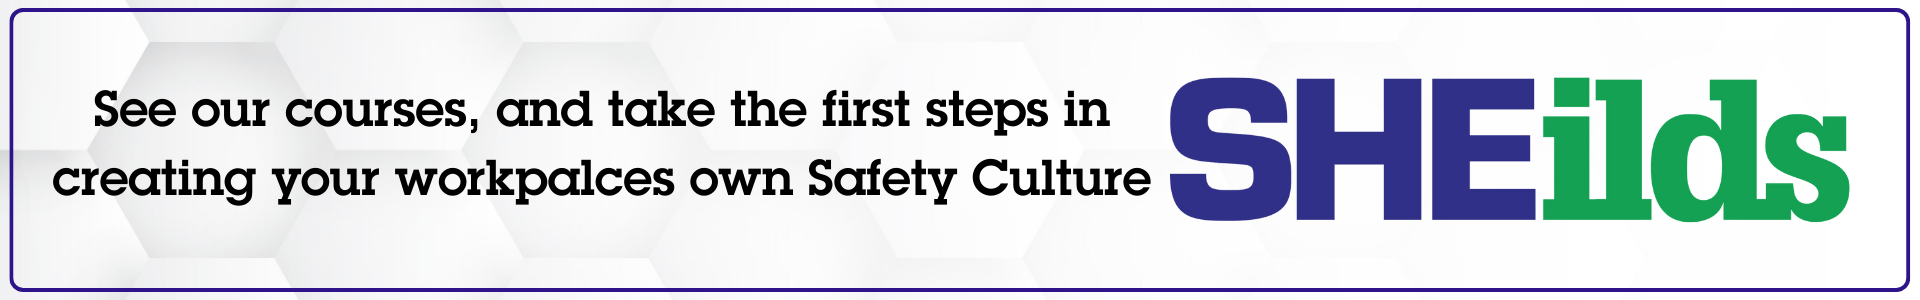 Take the first steps in creating your workplaces own safety culture